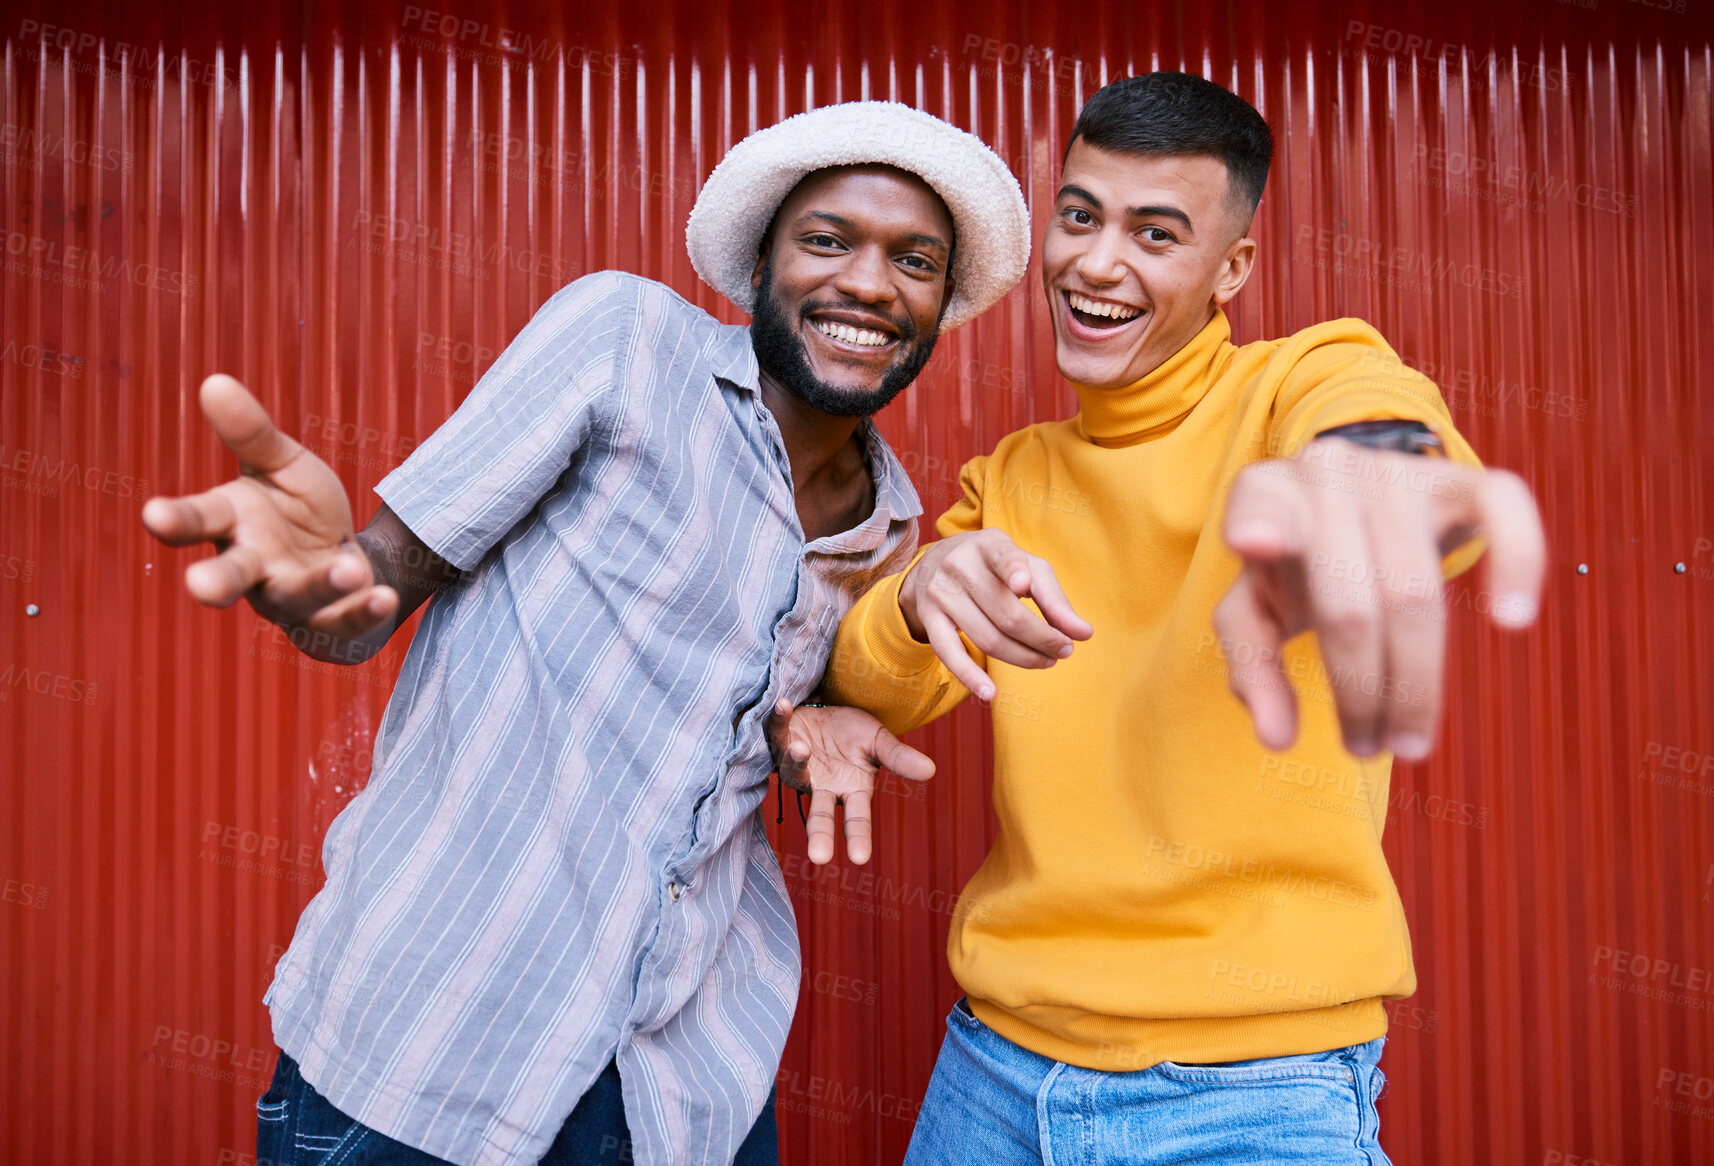 Buy stock photo Men, gen z or portrait of friends outdoor on red background in streetwear with fashion or style together. Diversity, students or excited people with happiness, smile or freedom on holiday vacation